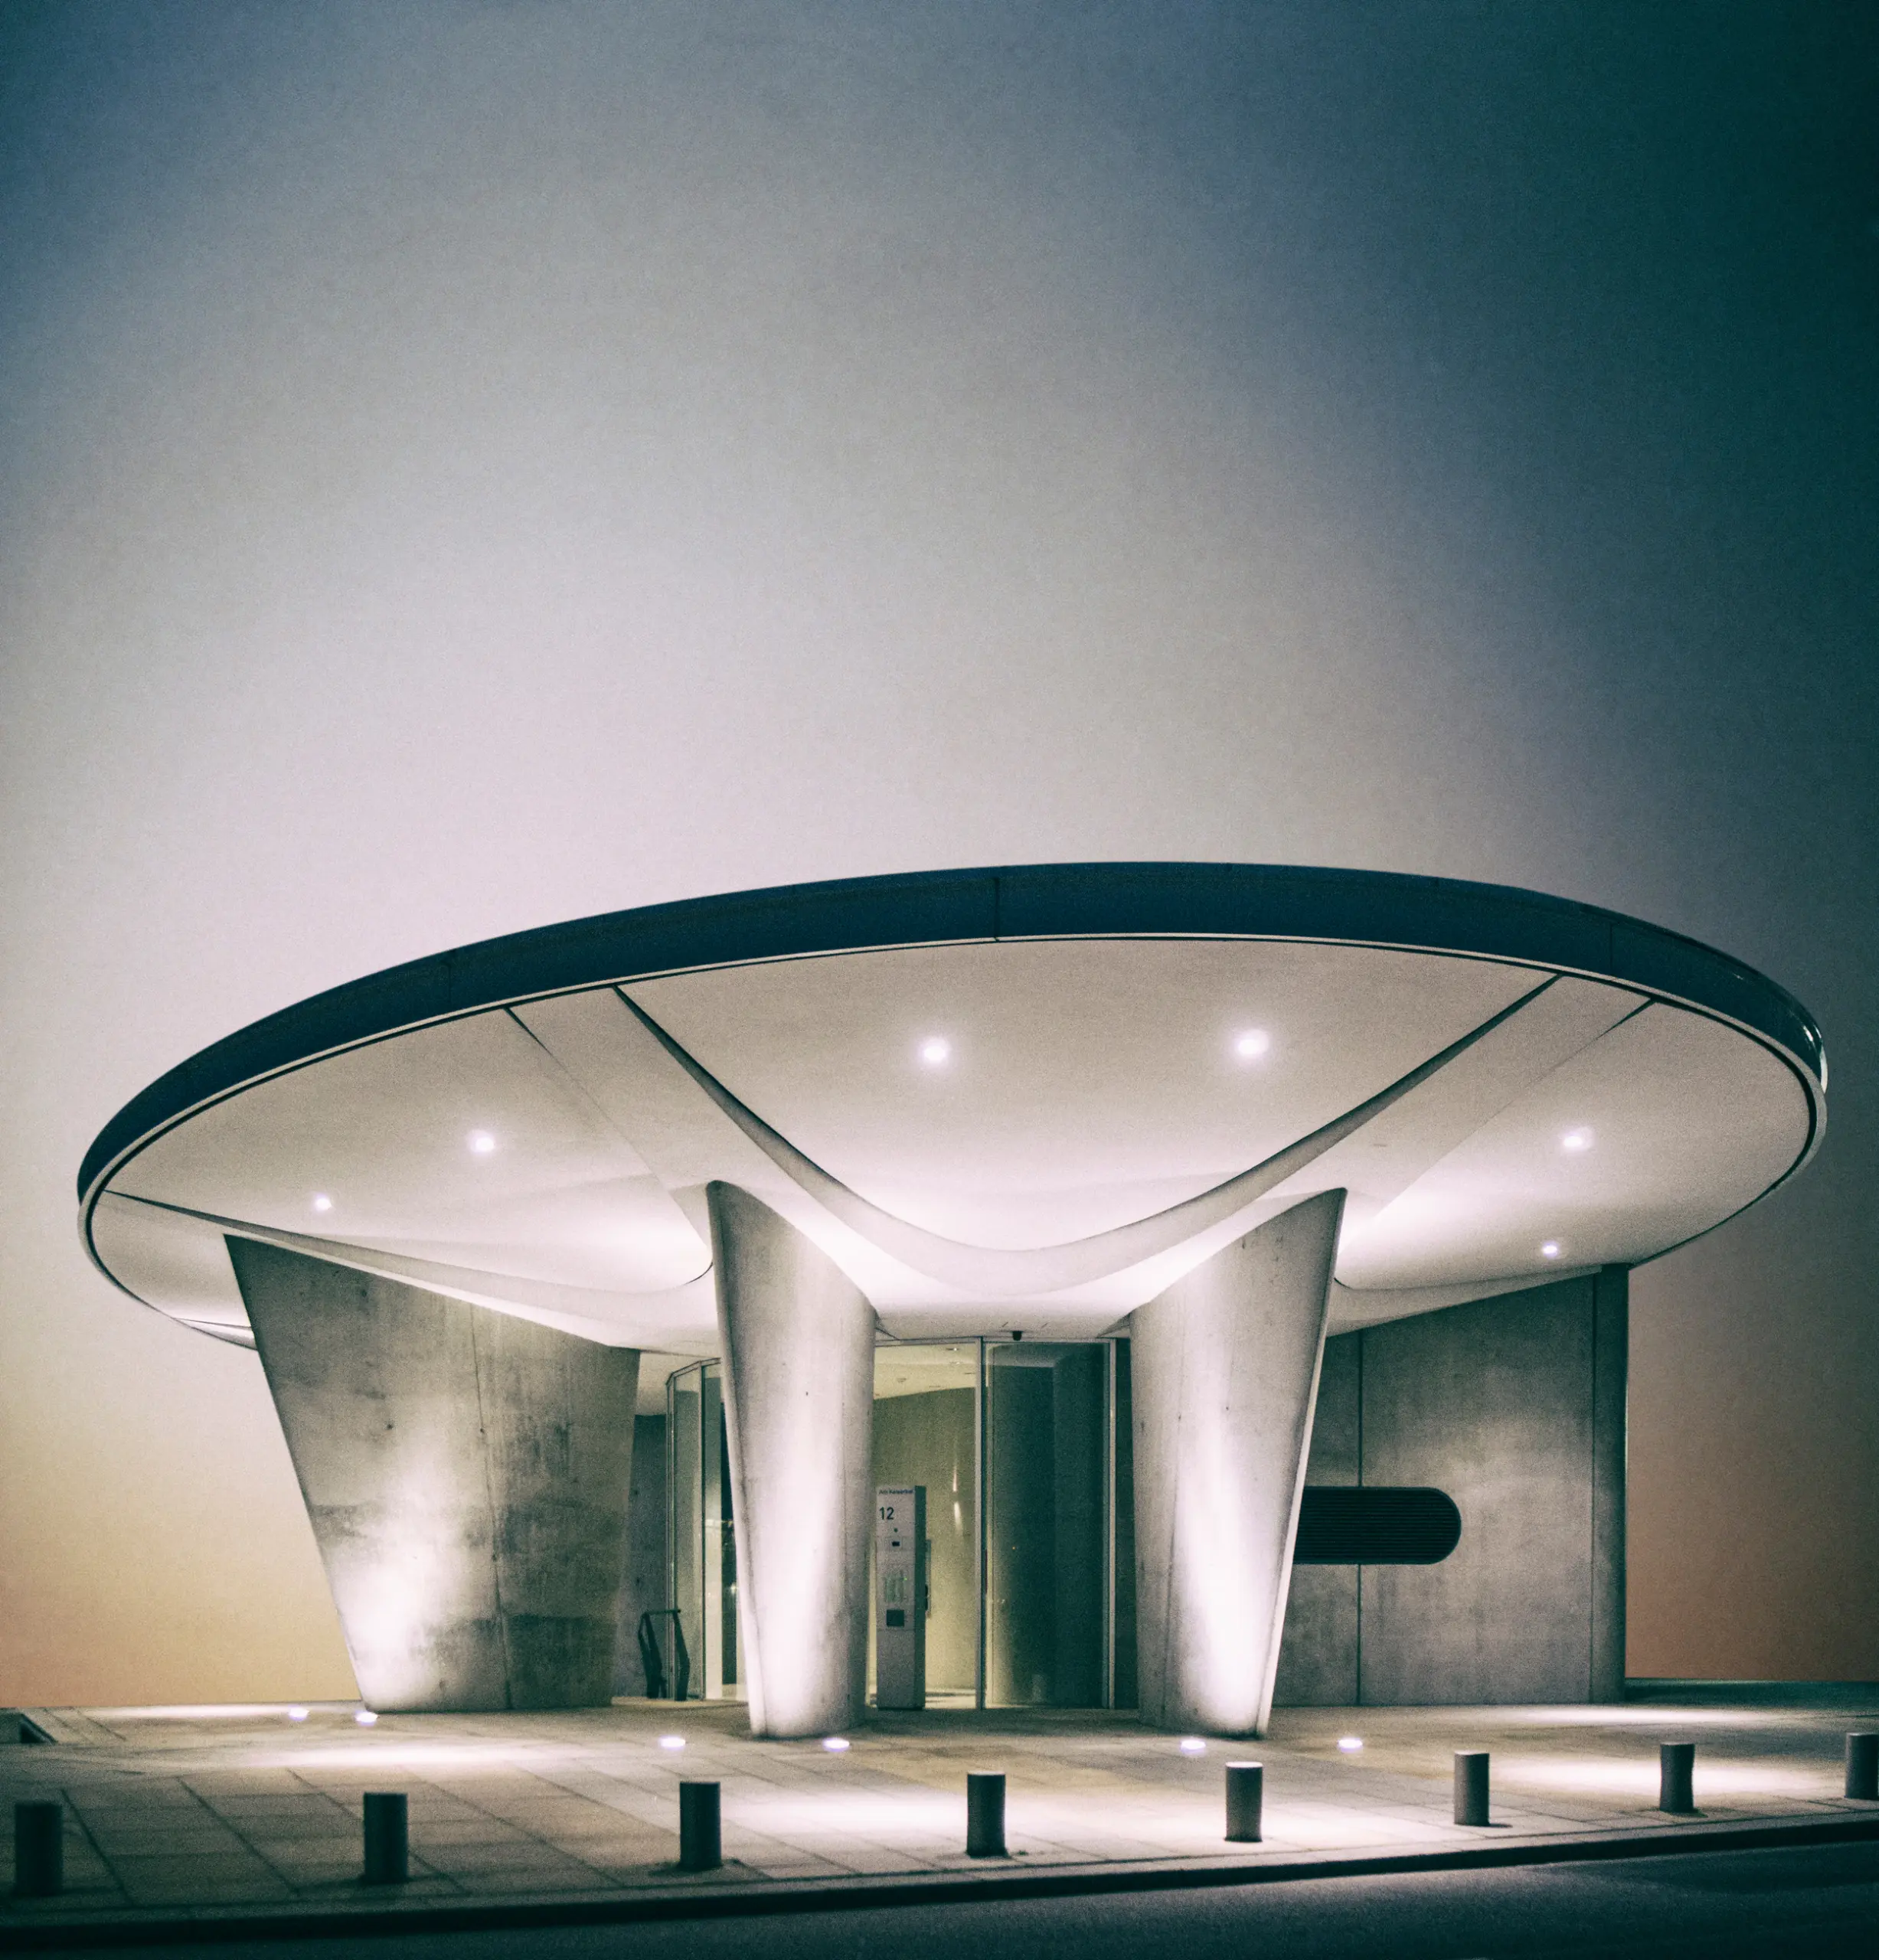 architecture photography of ufo like building in hamburg